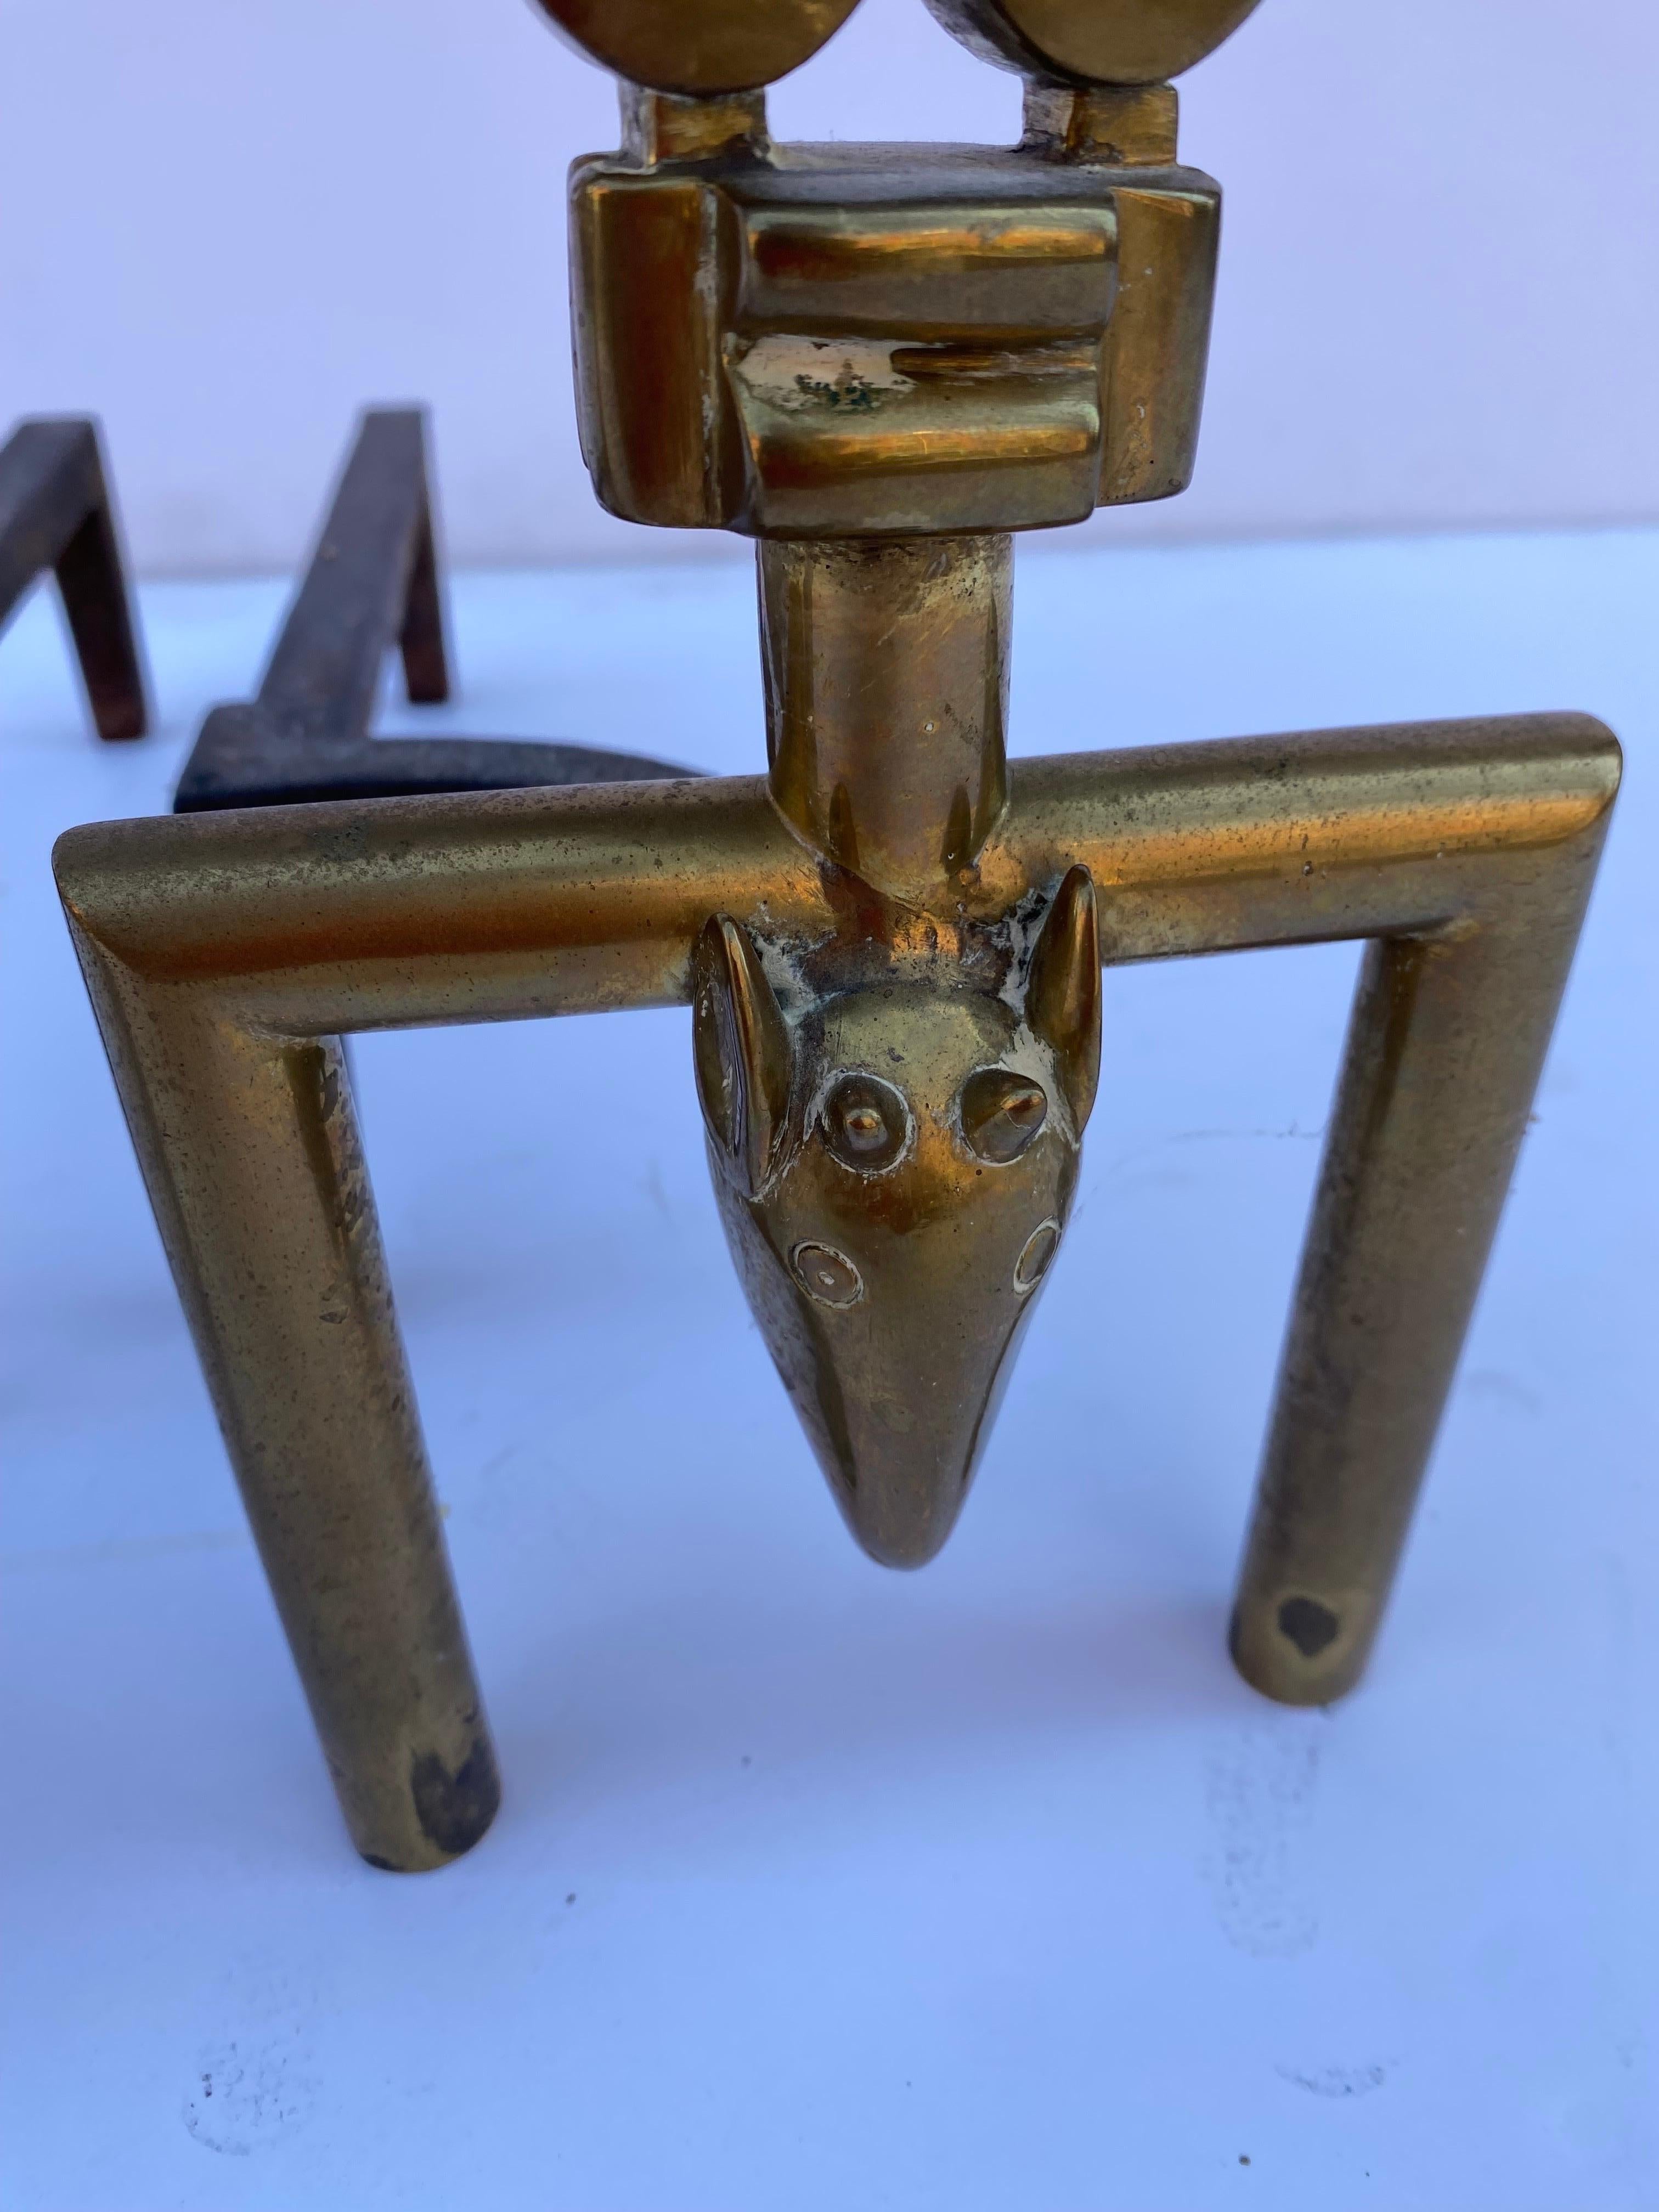 Pair of solid brass Andirons with animal heads at the bottom, Indian Design? Not sure of the design. They are very well made and good looking!